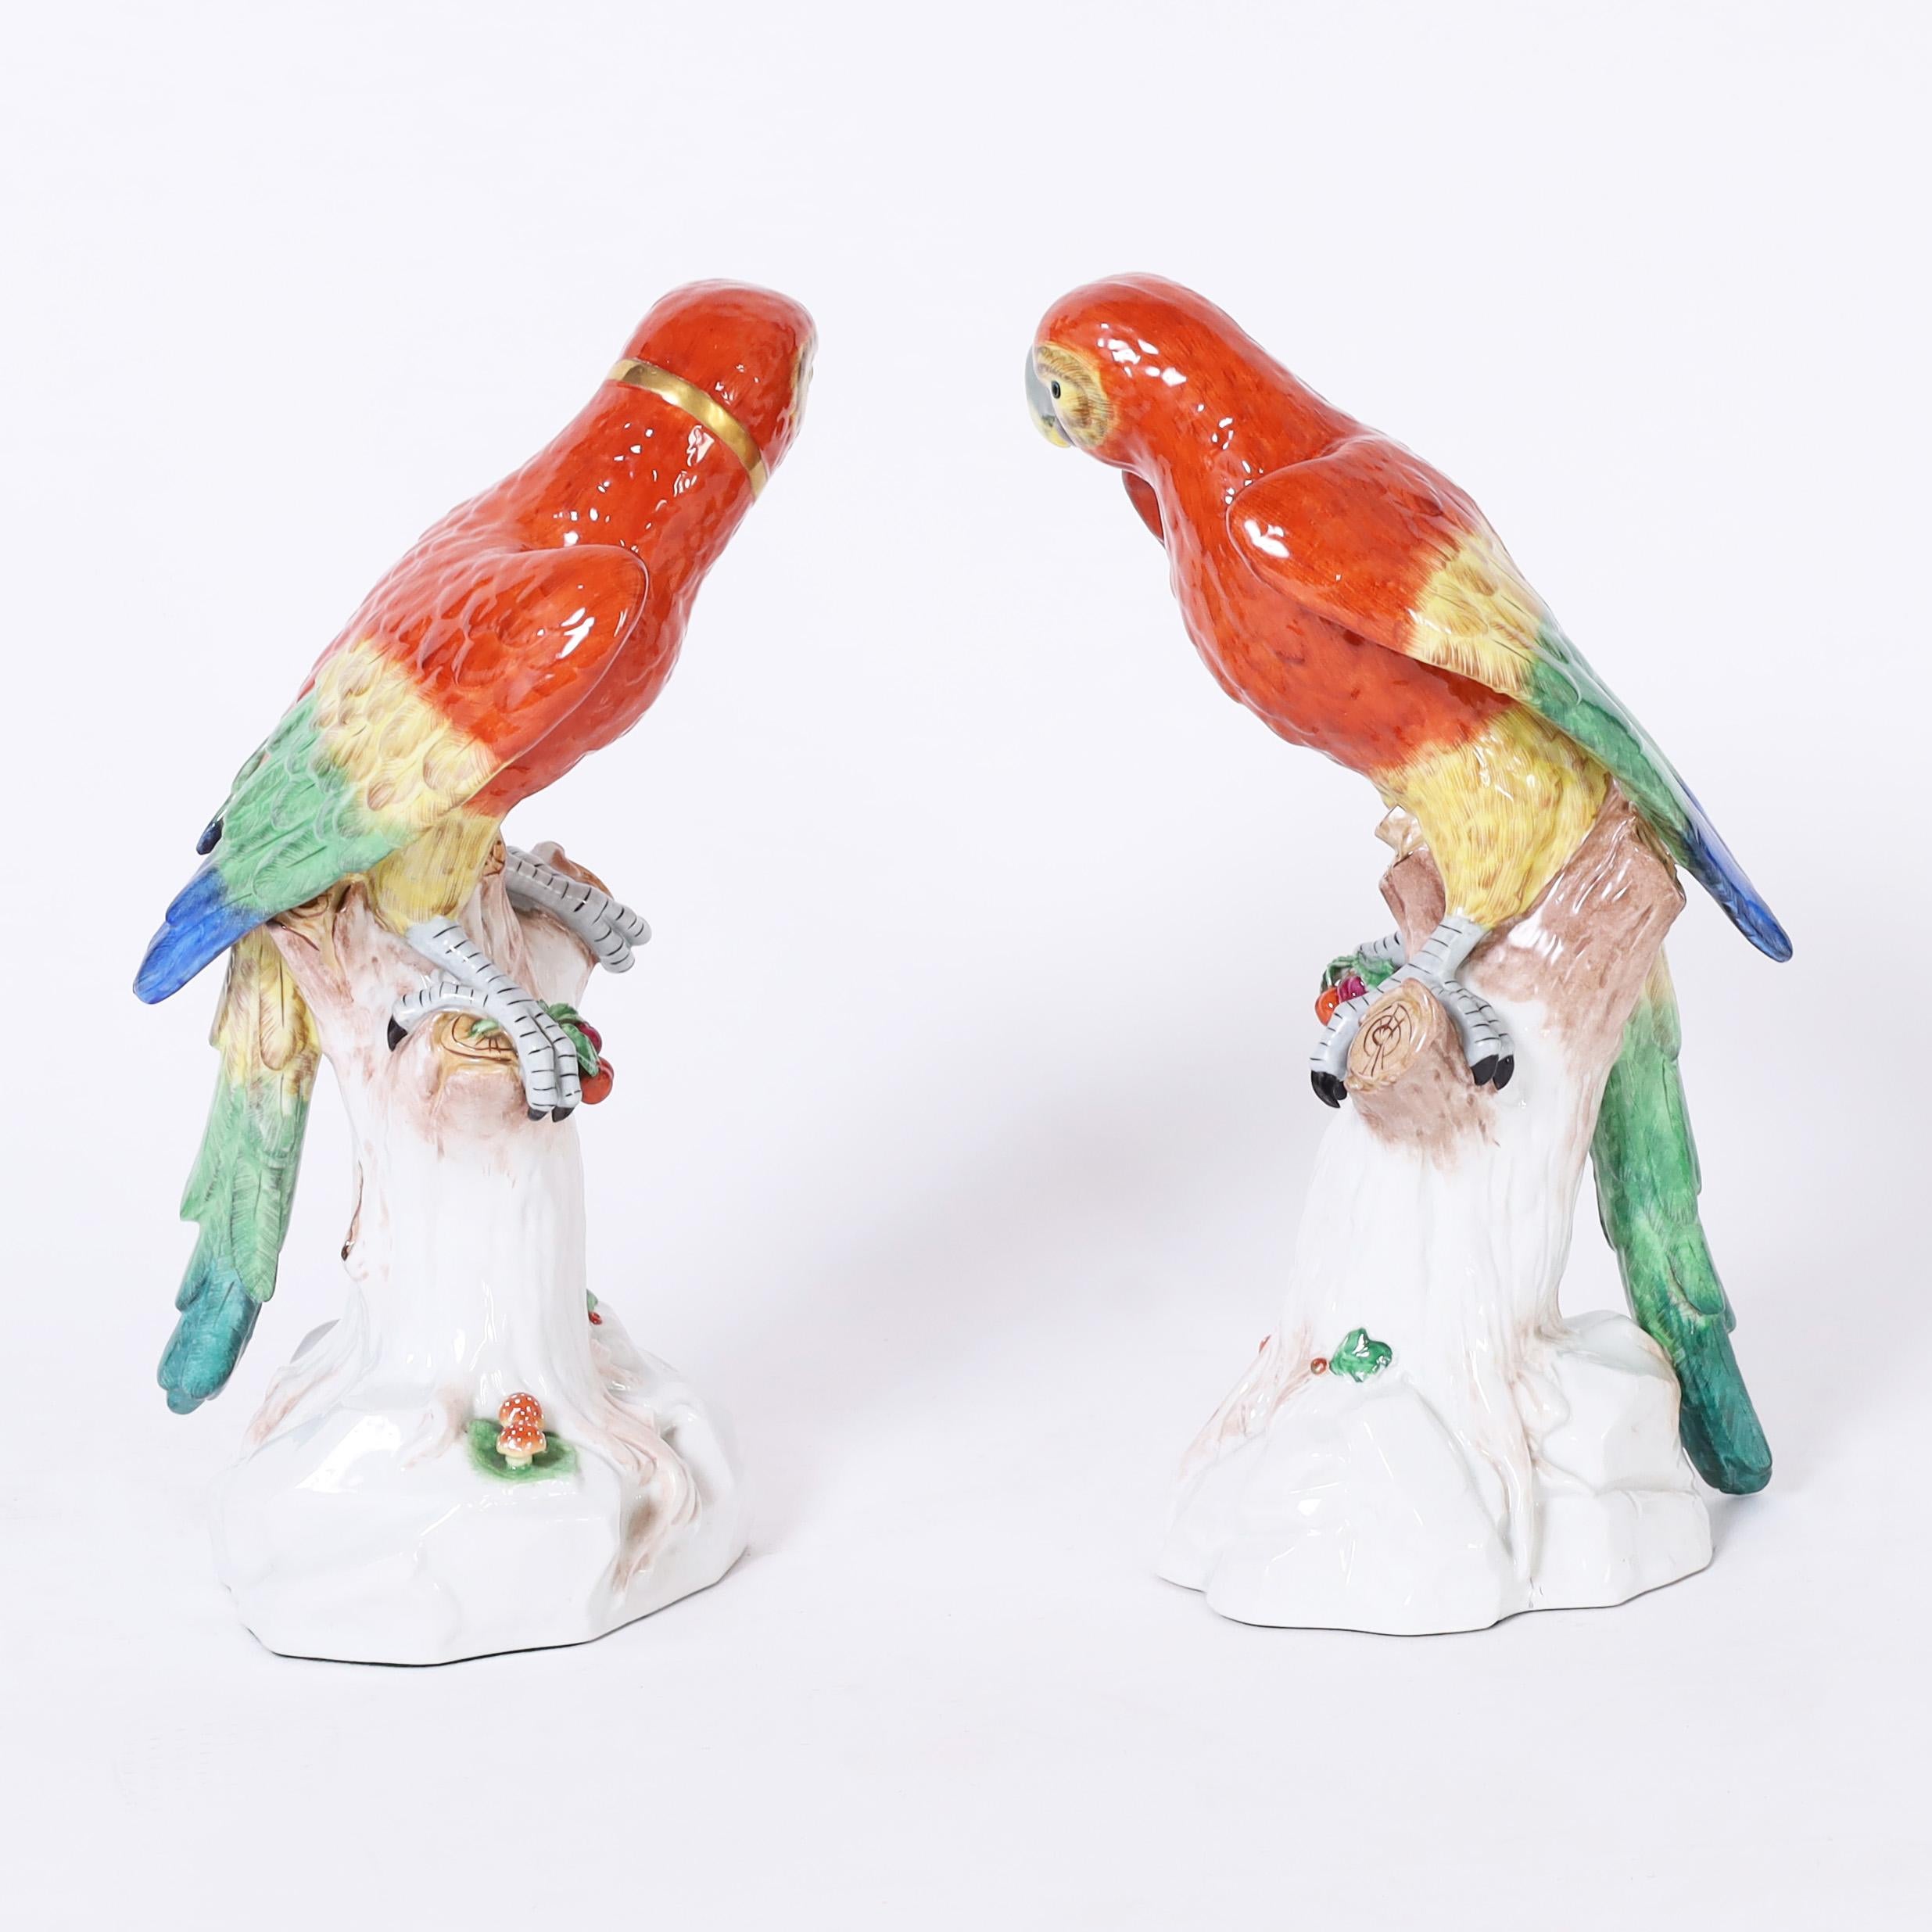 Striking pair of vintage life size porcelain parrots hand decorated with vivid tropical colors and perched on tree trunks. Signed Dresden on the bottoms.